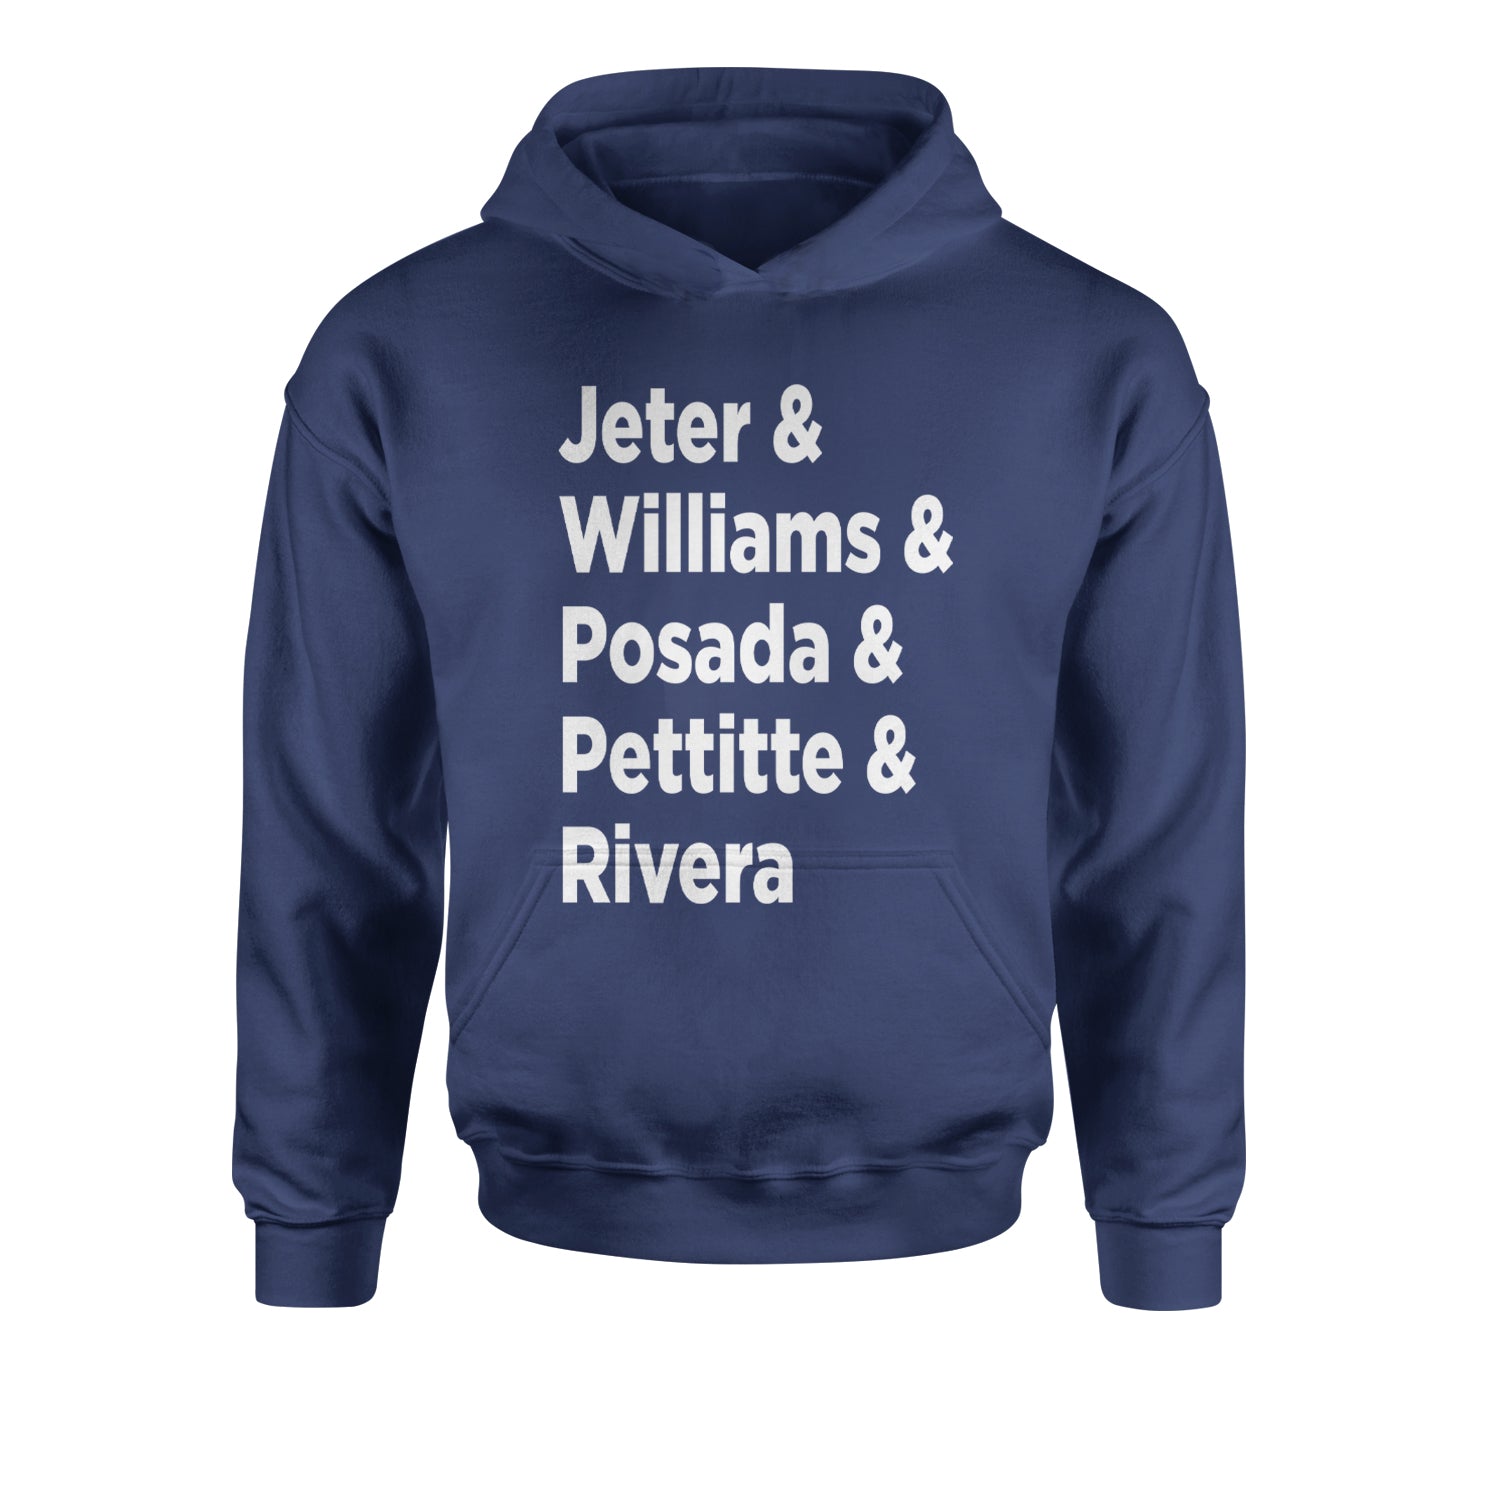 Jeter and Williams and Posada and Pettitte and Rivera Youth-Sized Hoodie baseball, comes, here, judge, the by Expression Tees